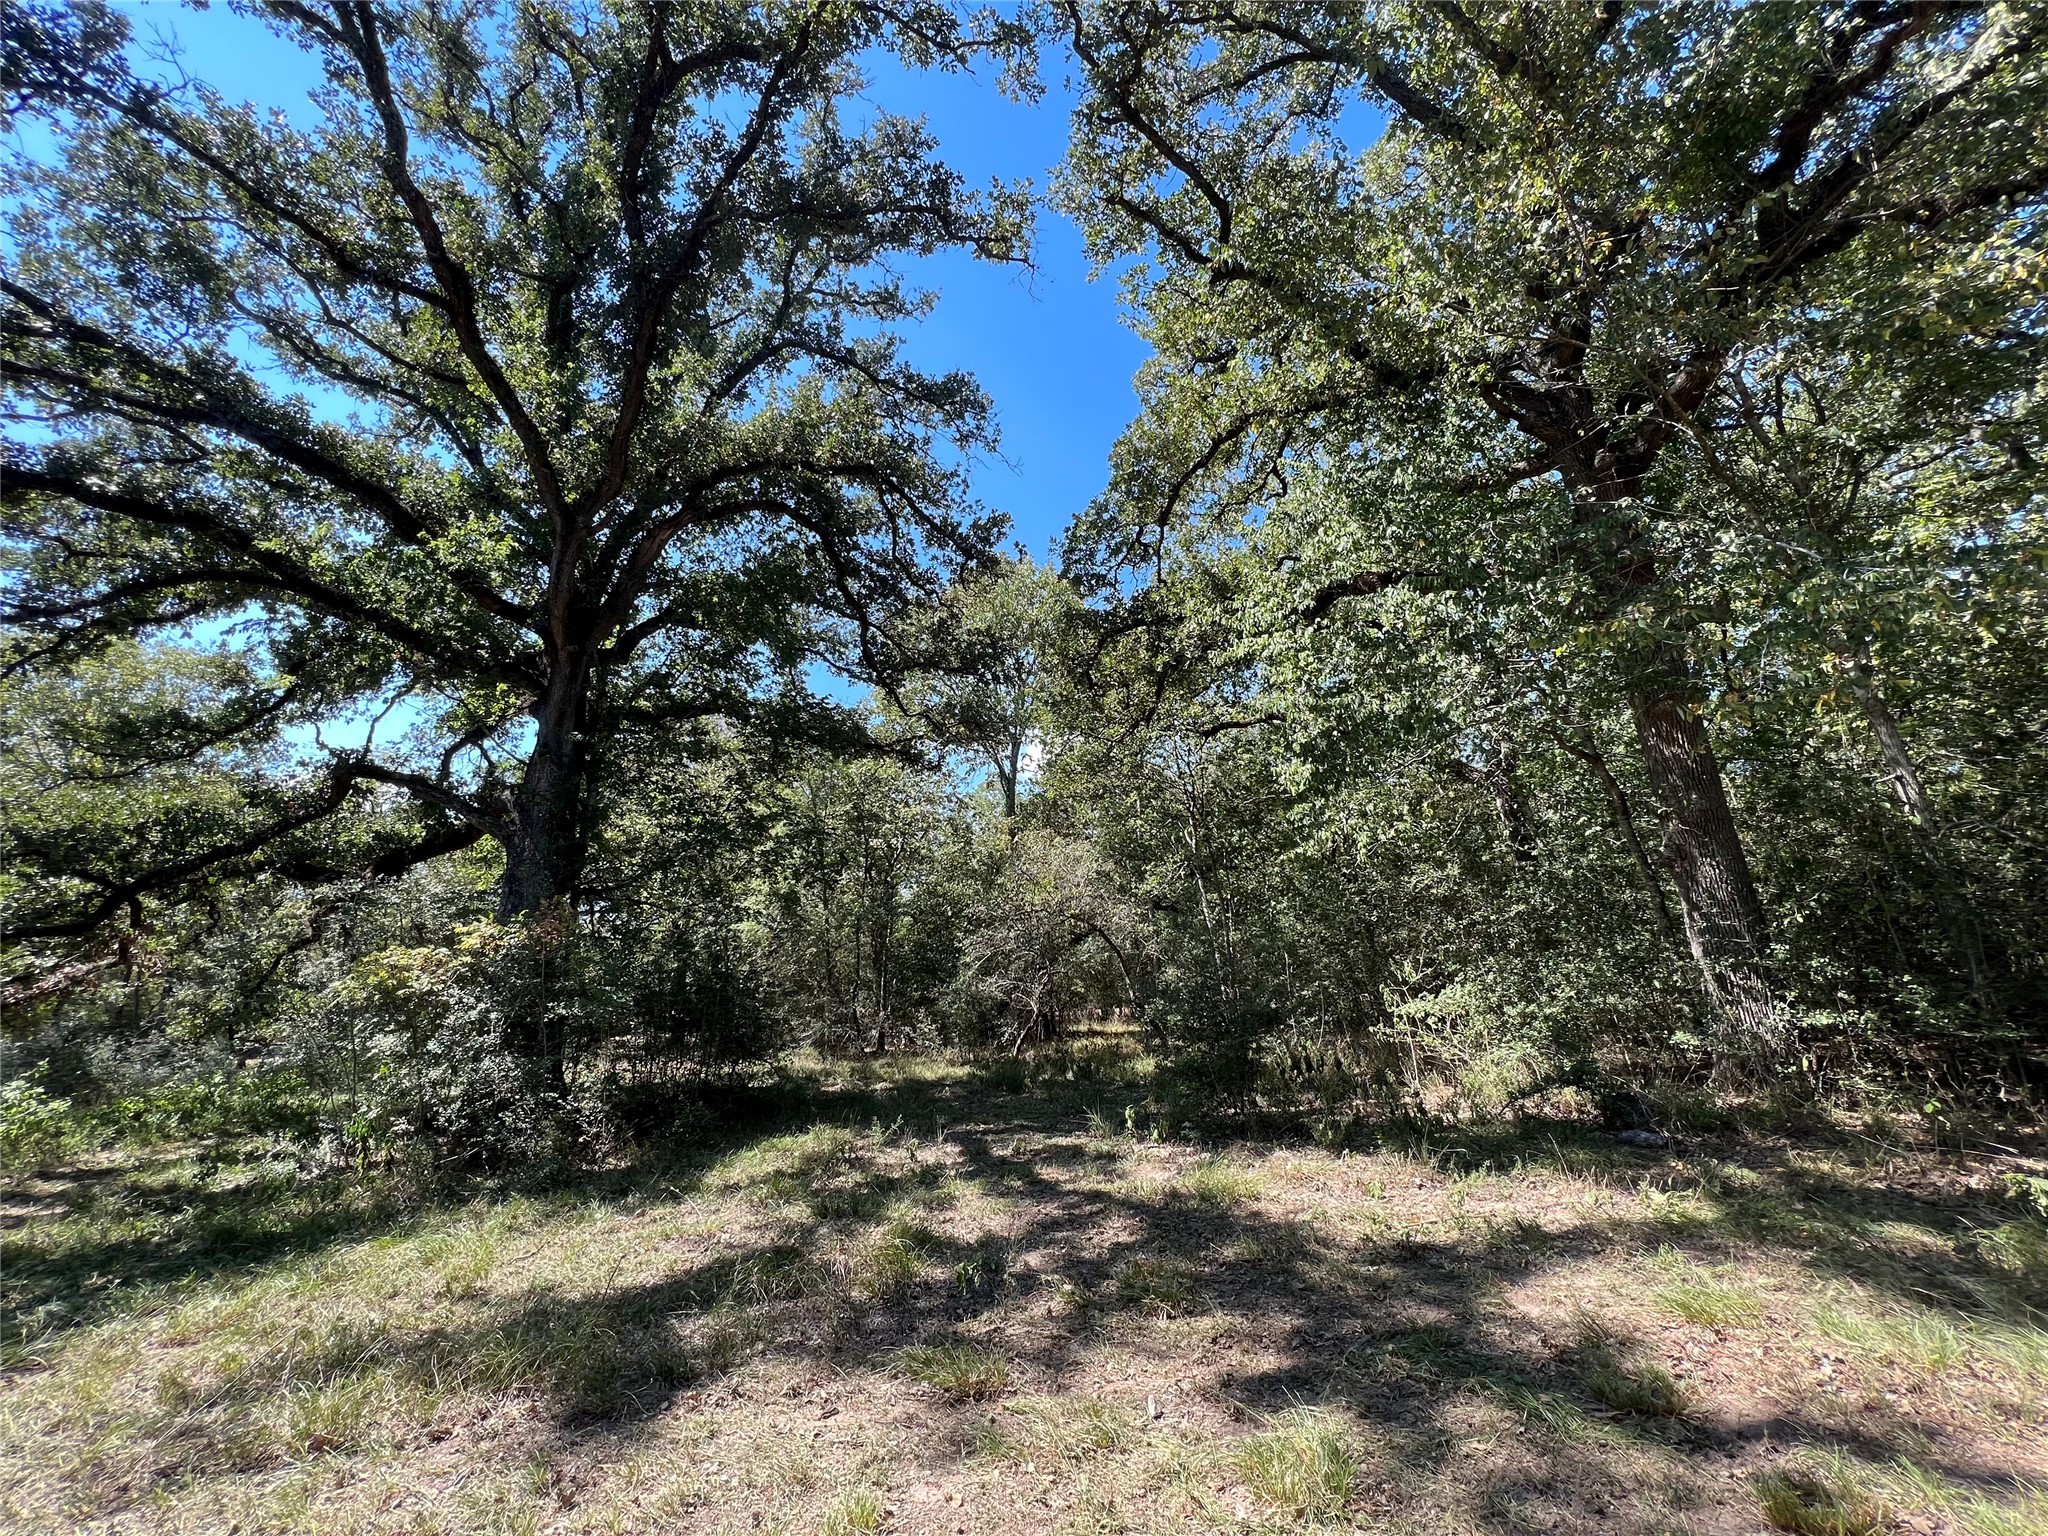 LOT 15 of RANCHES OF CLEAR CREEK. NOTE: Lot lines are approximate.